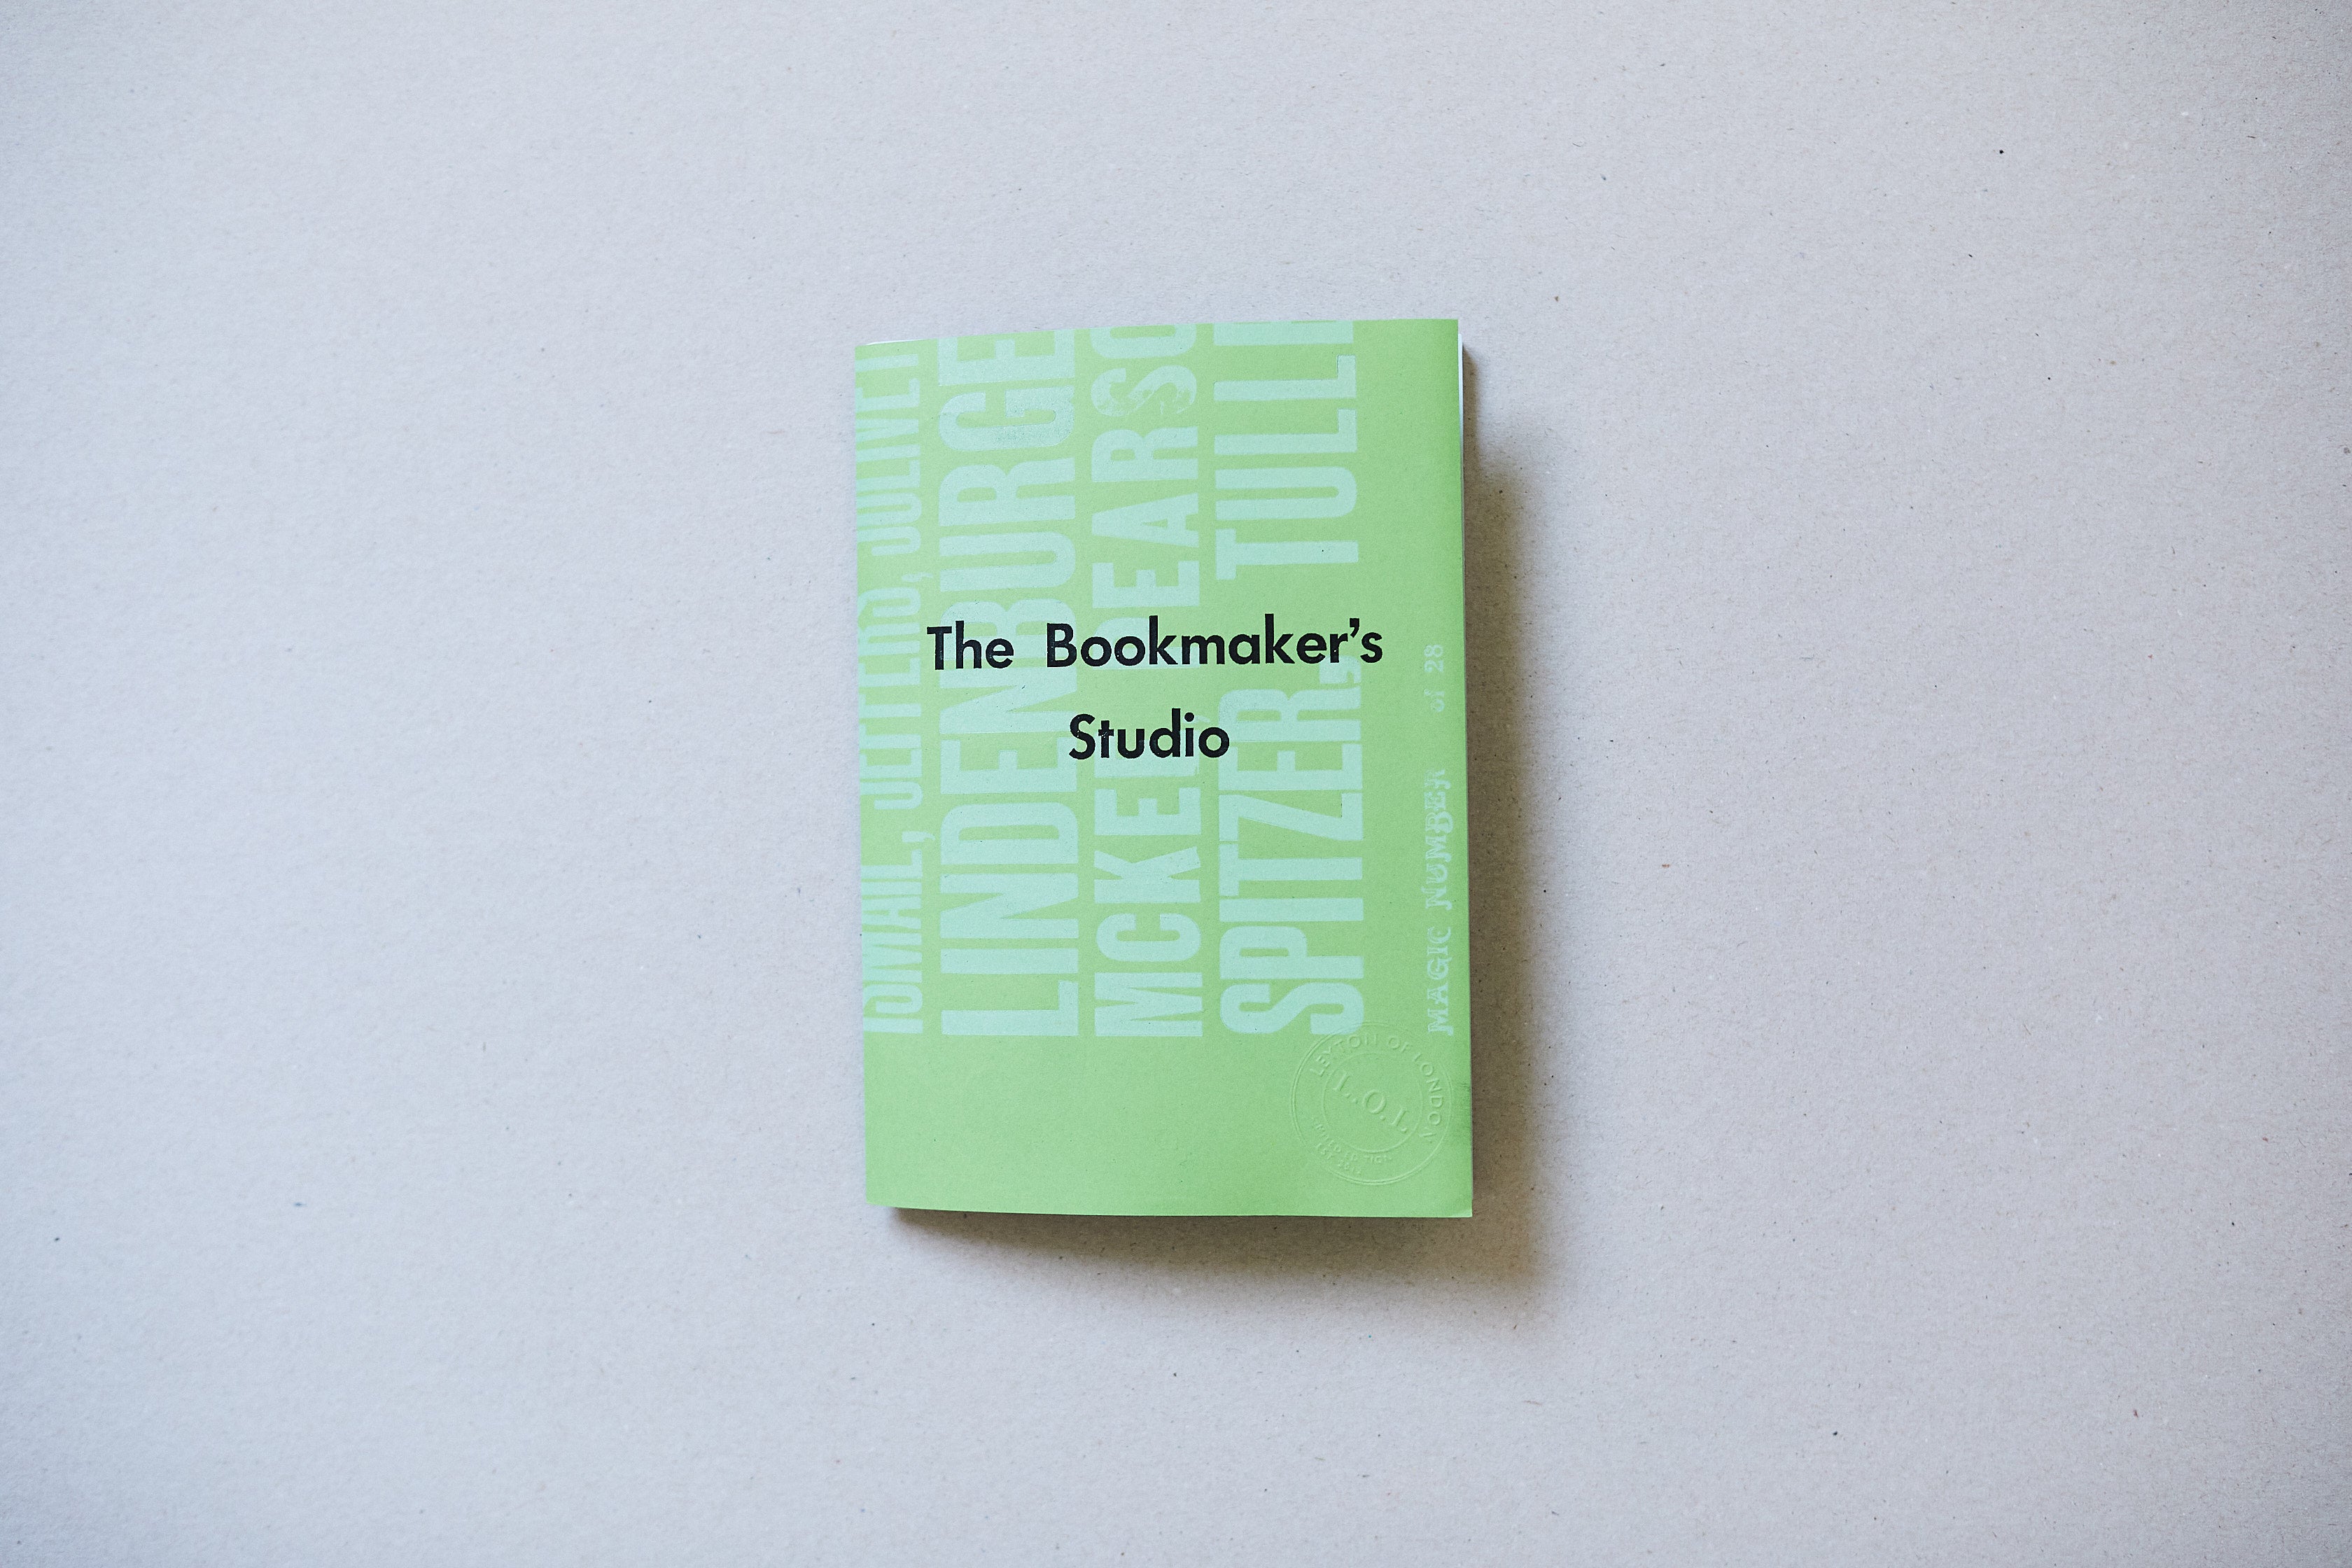 The Bookmaker's Studio - Abridged A5 Edition - Signed